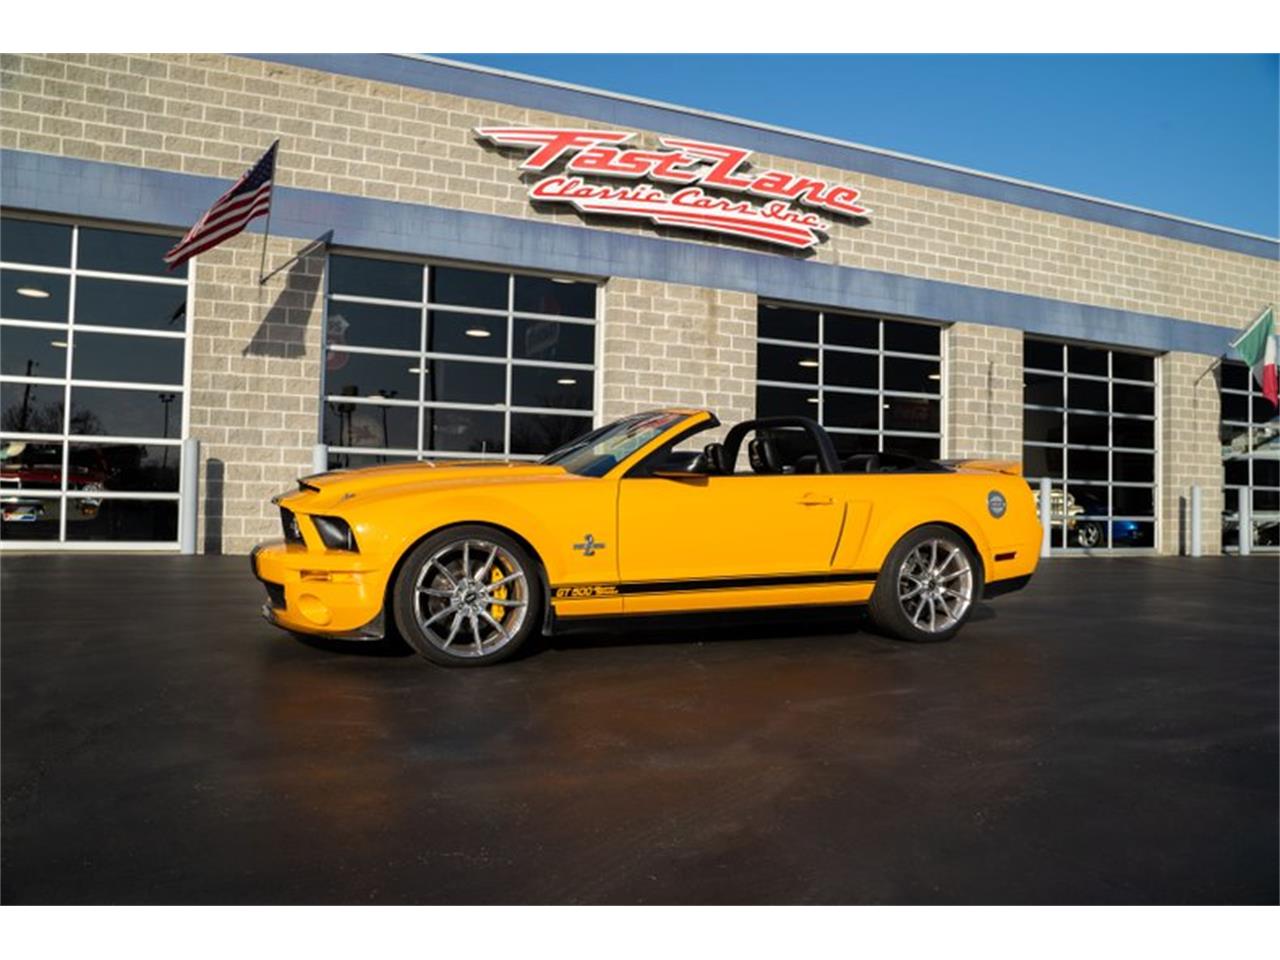 2007 Ford Mustang Shelby Super Snake in St. Charles, Missouri for sale in Saint Charles, MO